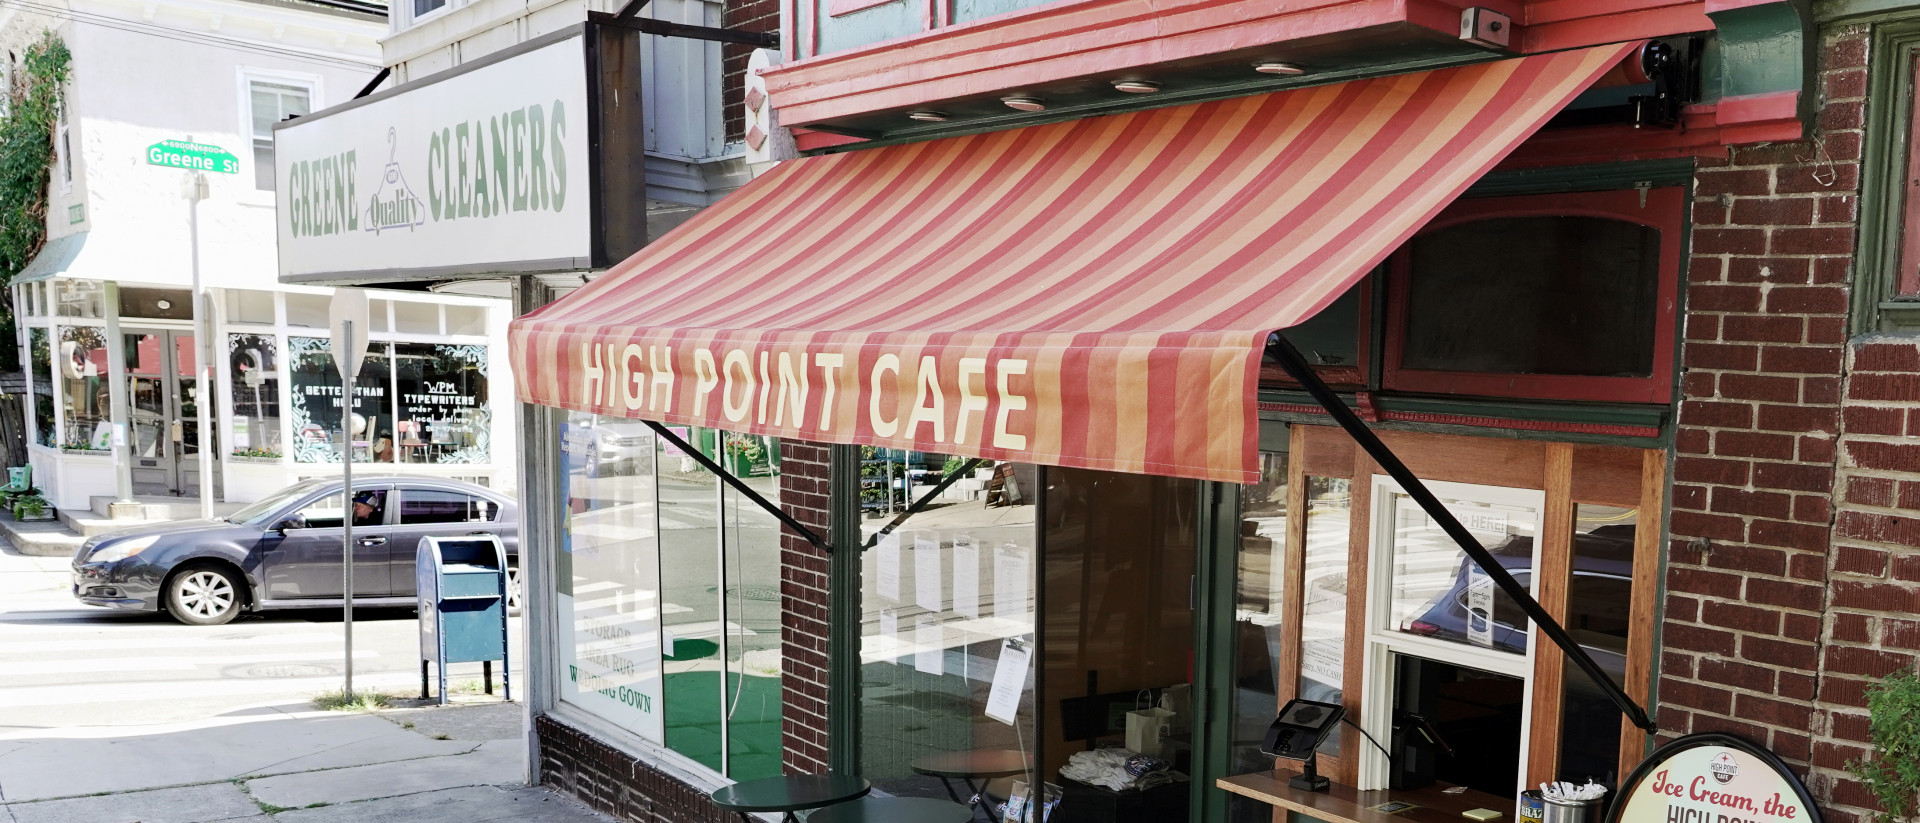 bistro awning at the high point cafe in philly